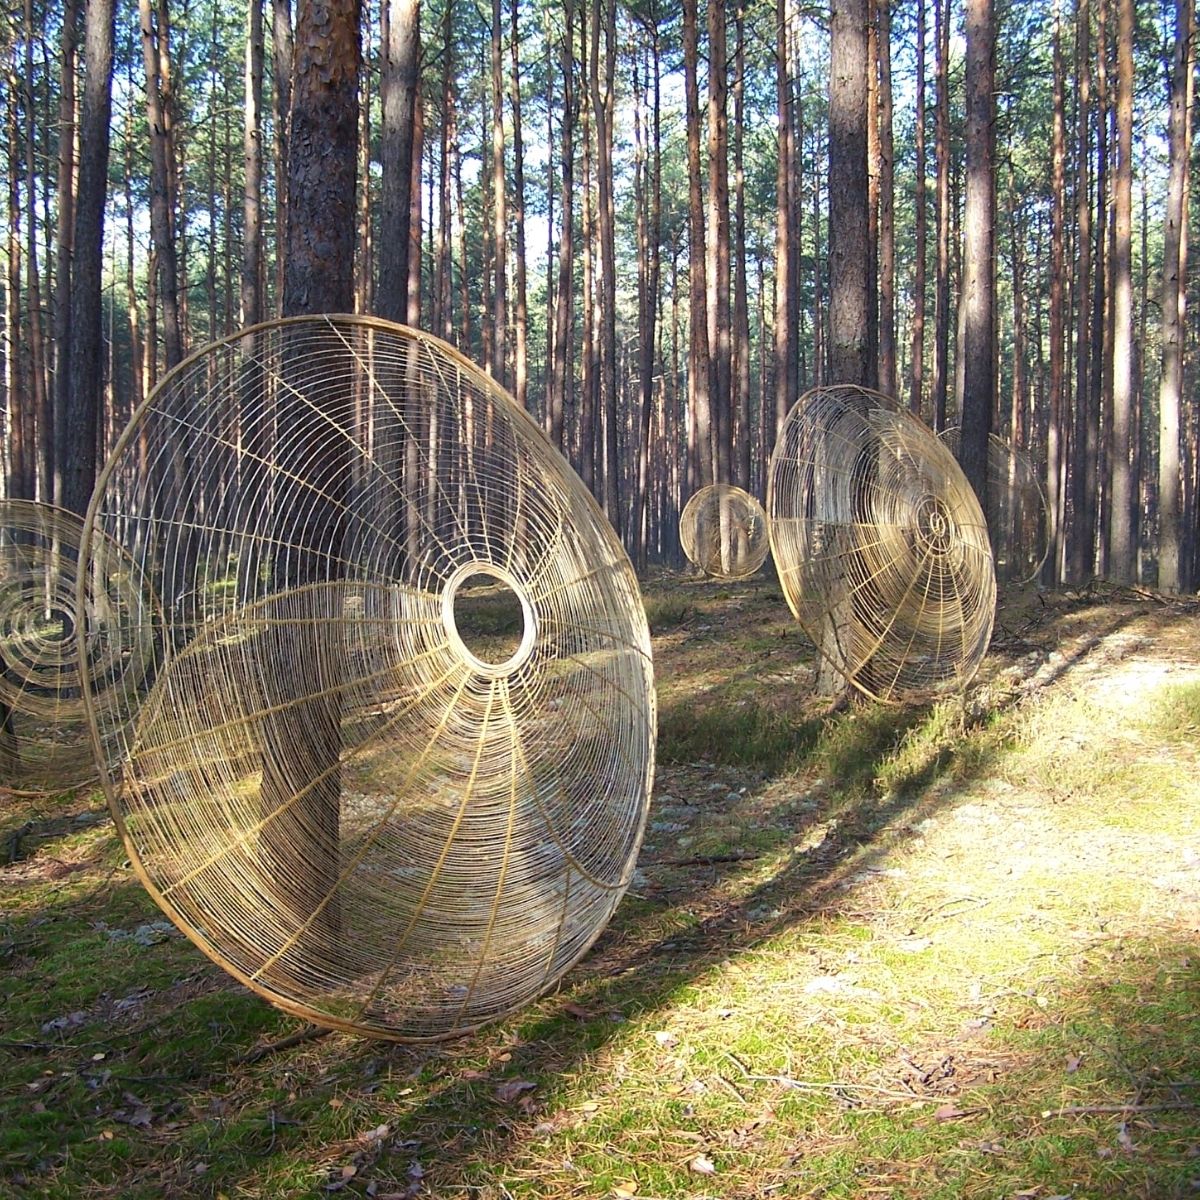 Land Art Is Miroslaw Maszlanko's Passion - An Unlimited Patience to Create "Diffraction"